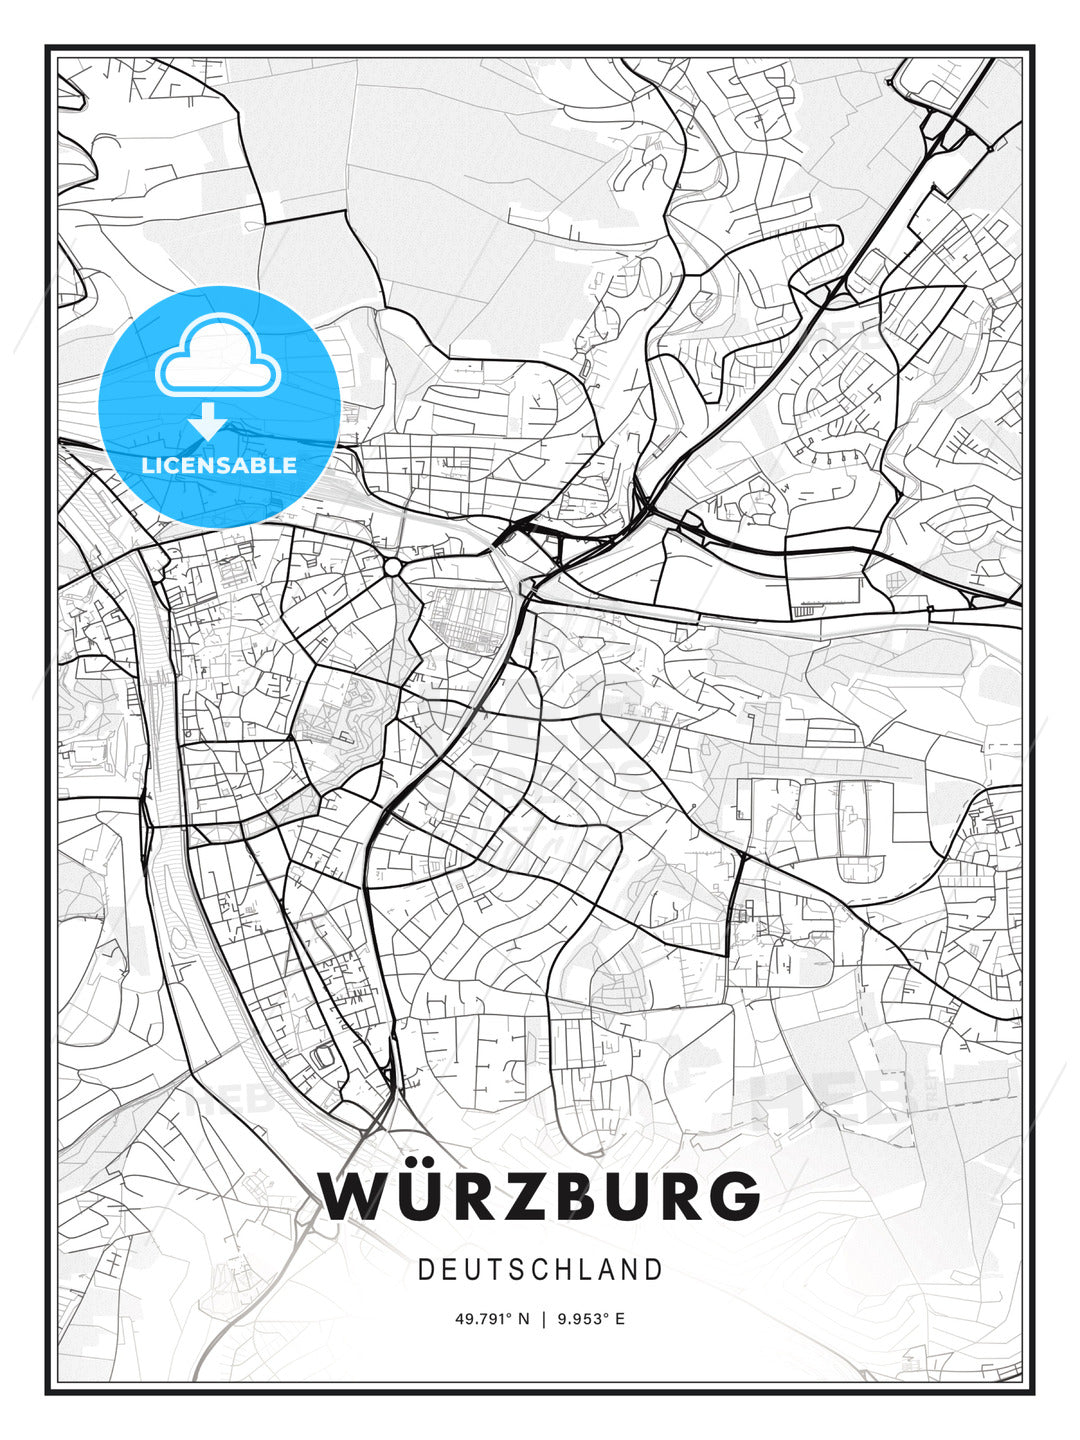 WÜRZBURG / Wurzburg, Germany, Modern Print Template in Various Formats - HEBSTREITS Sketches